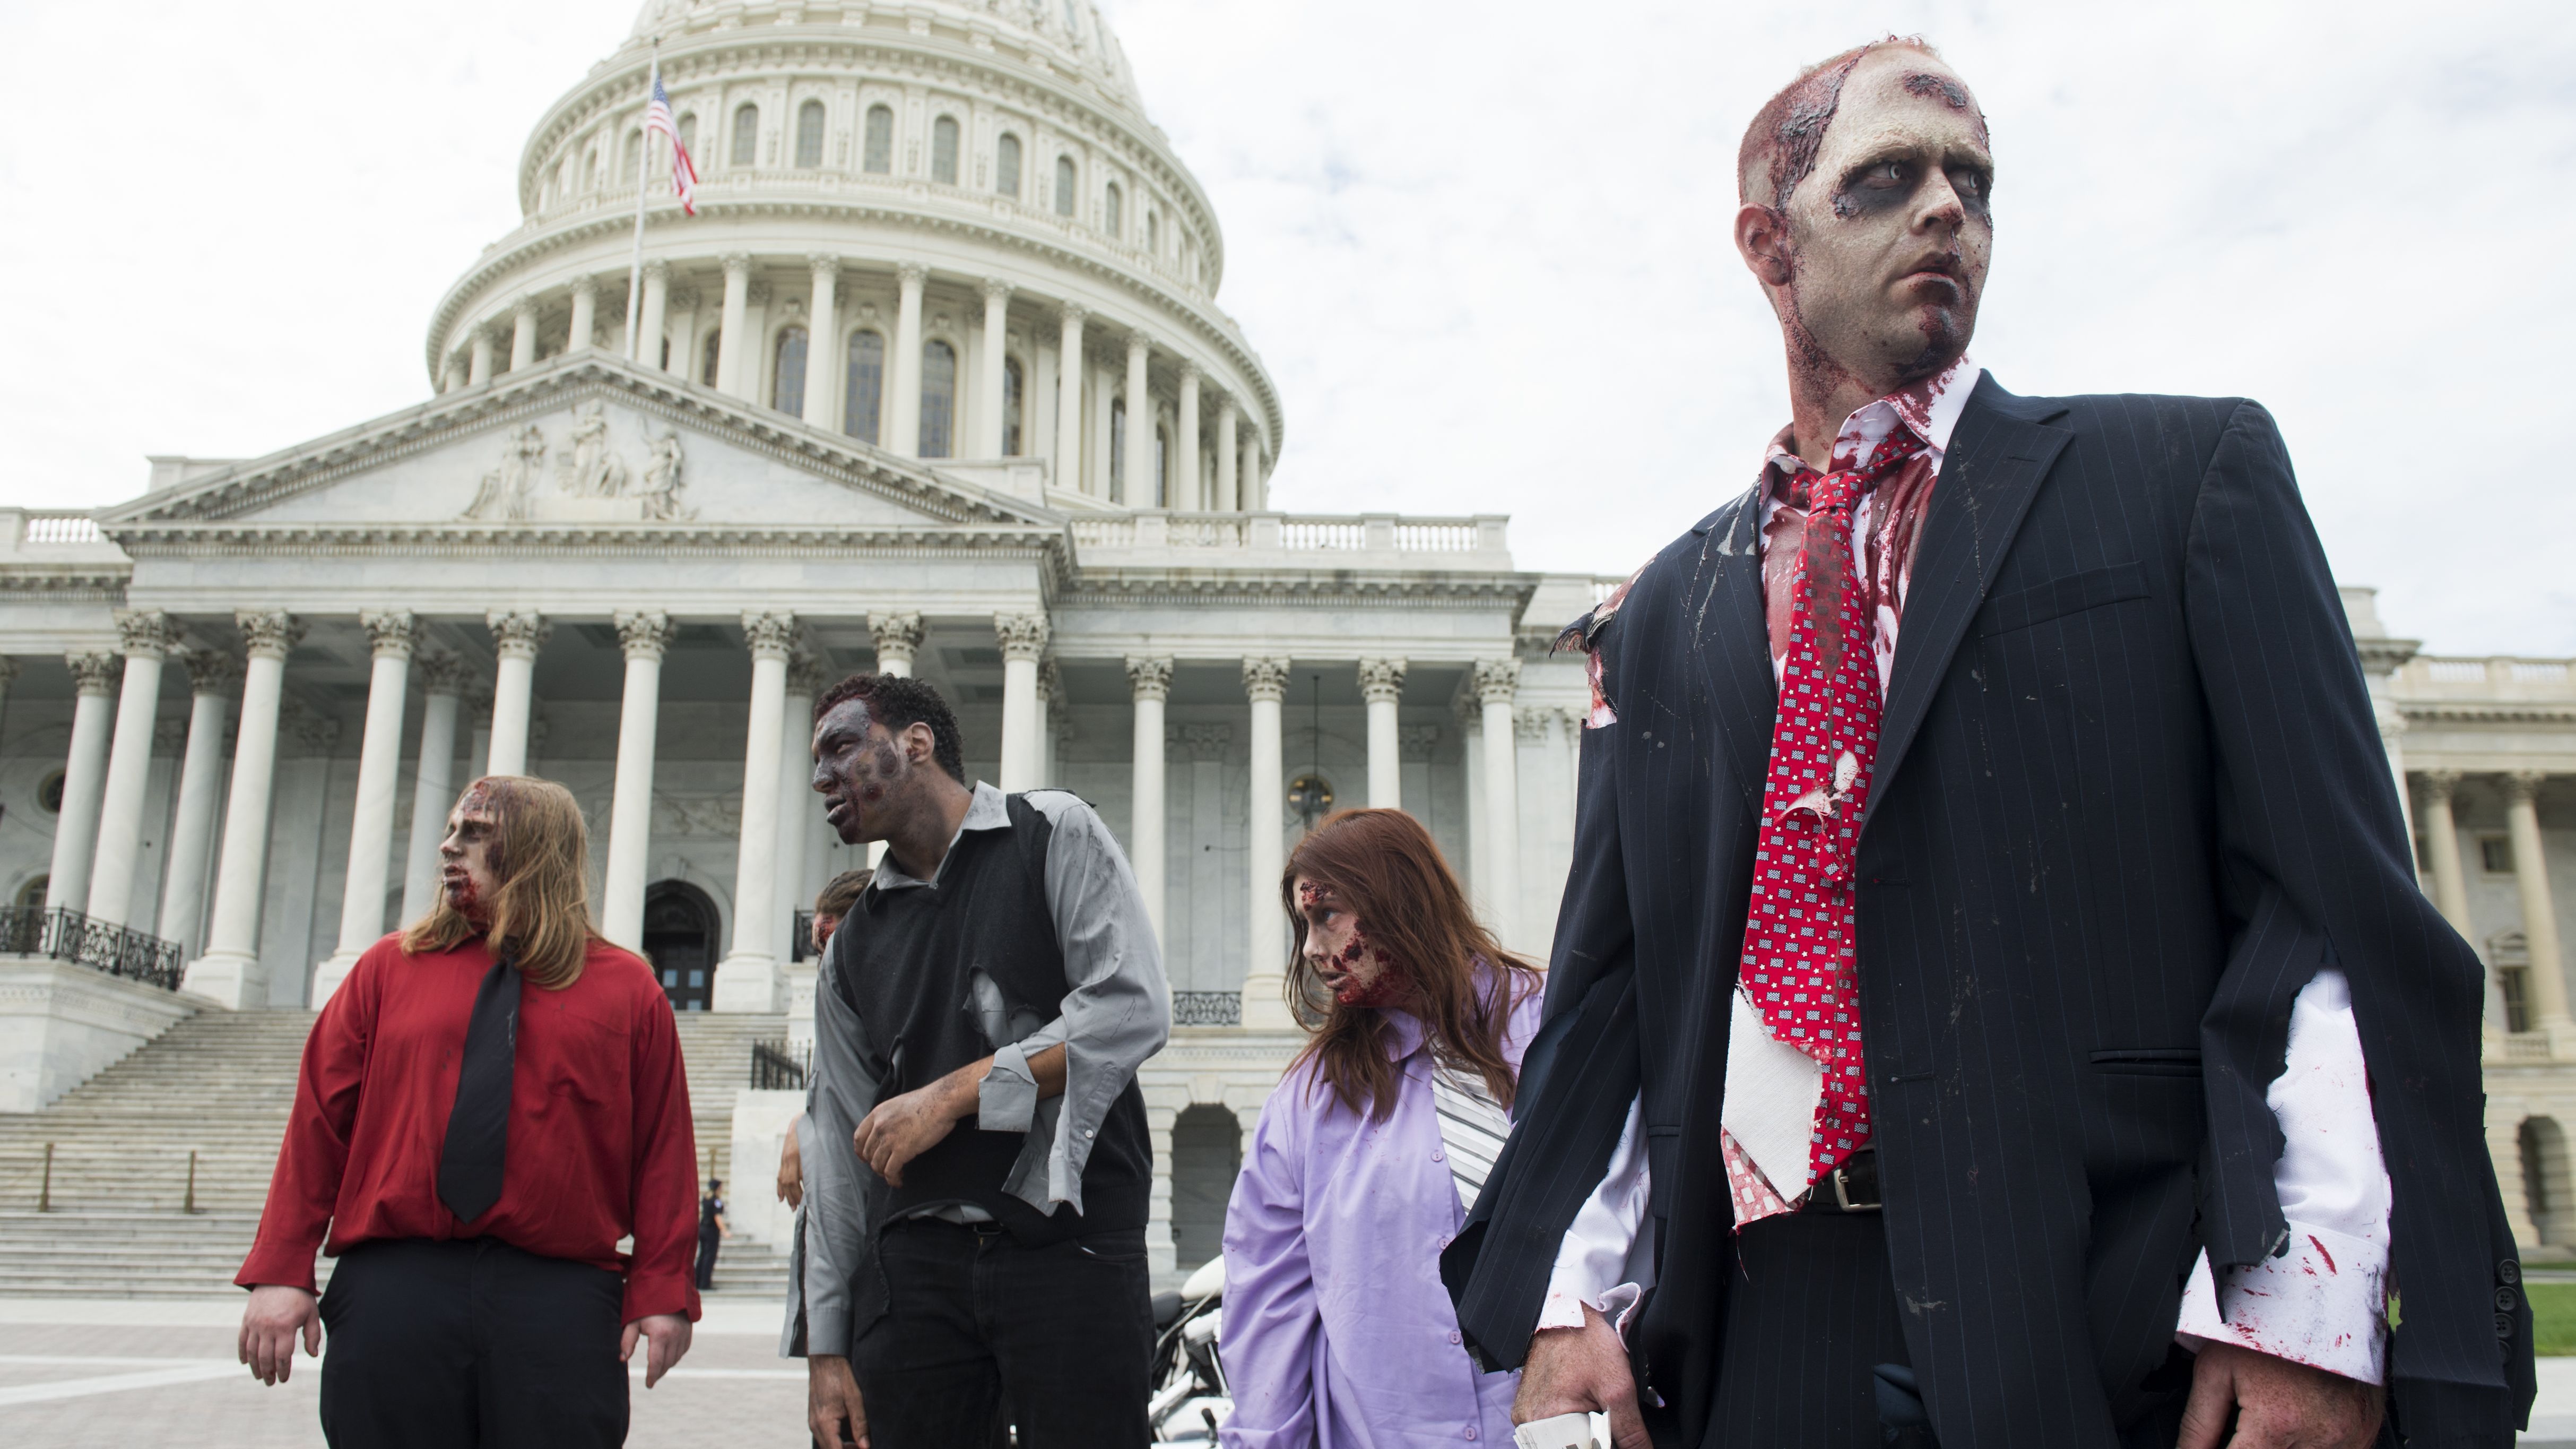  Zombies stumble across the East Plaza of the U.S. Capitol to promote 'The Warehouse: Project 4.1' urban haunted house in Rockville, Maryland, on Wednesday, October 3, 2012. 